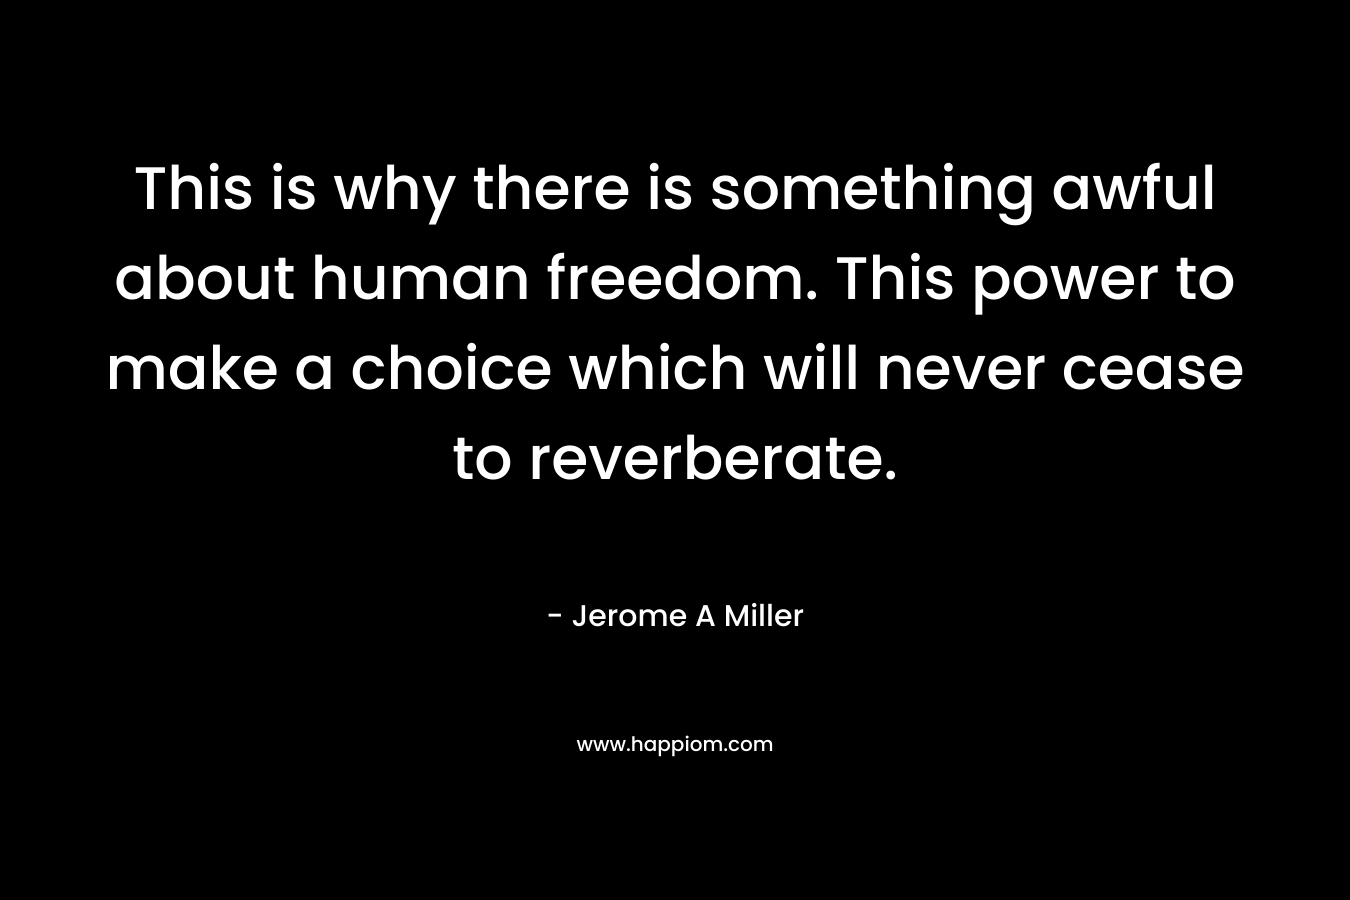 This is why there is something awful about human freedom. This power to make a choice which will never cease to reverberate.